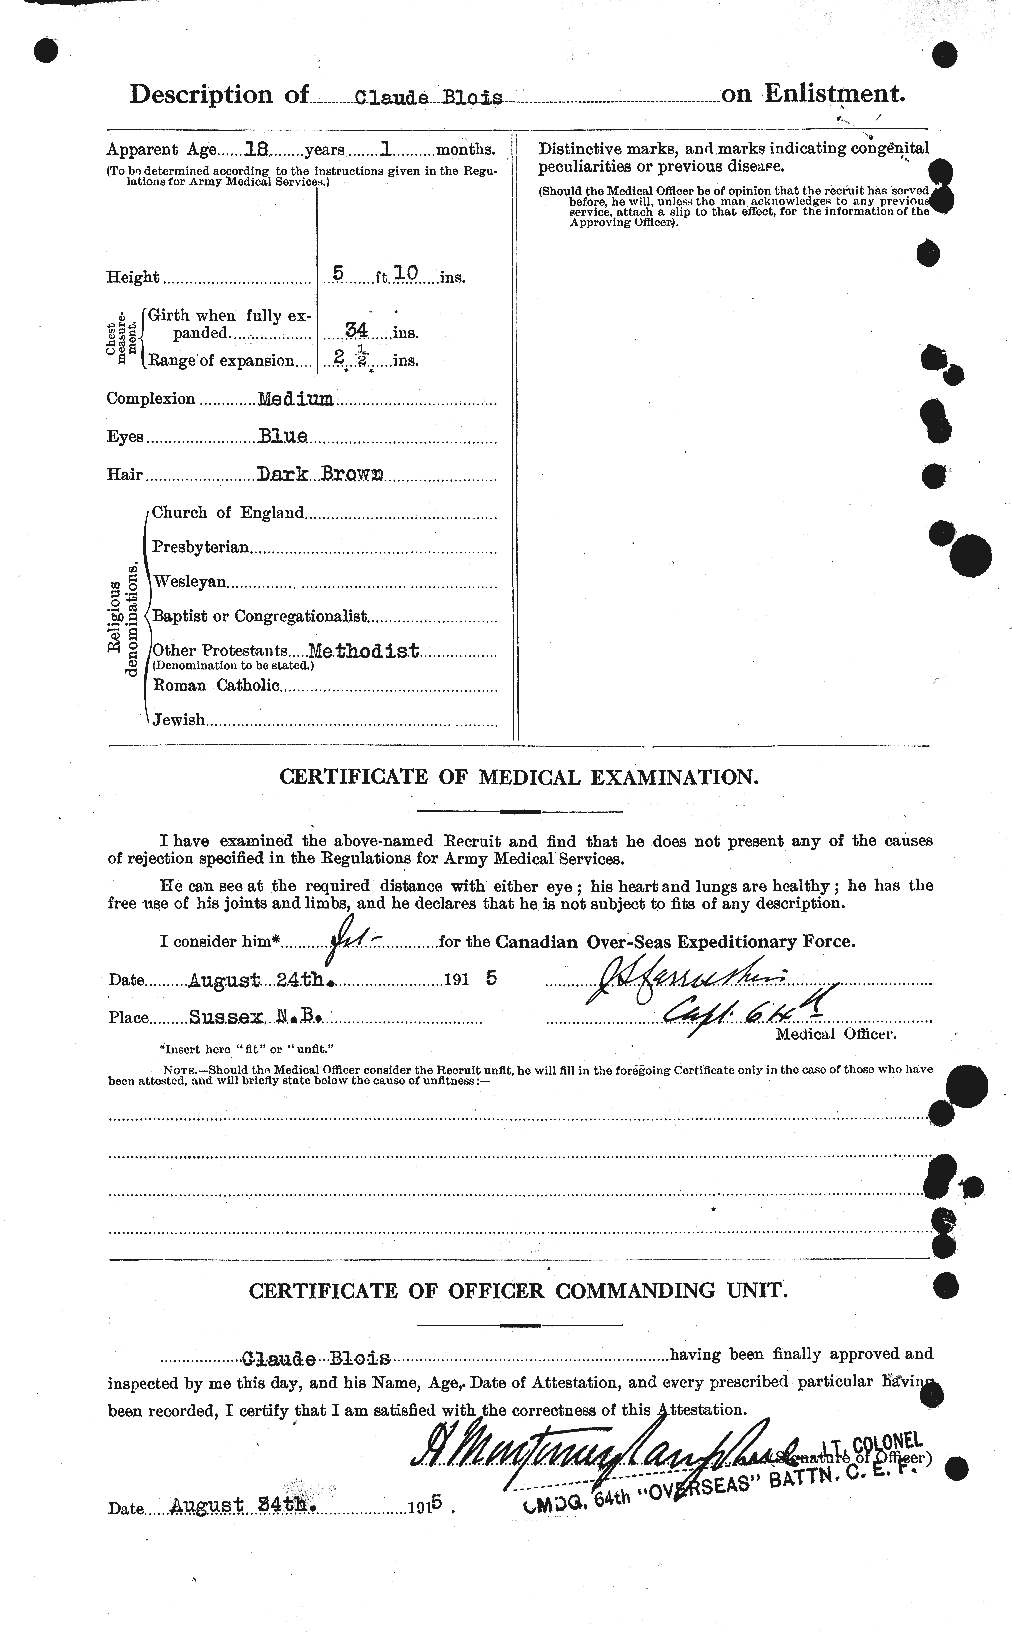 Personnel Records of the First World War - CEF 248446b